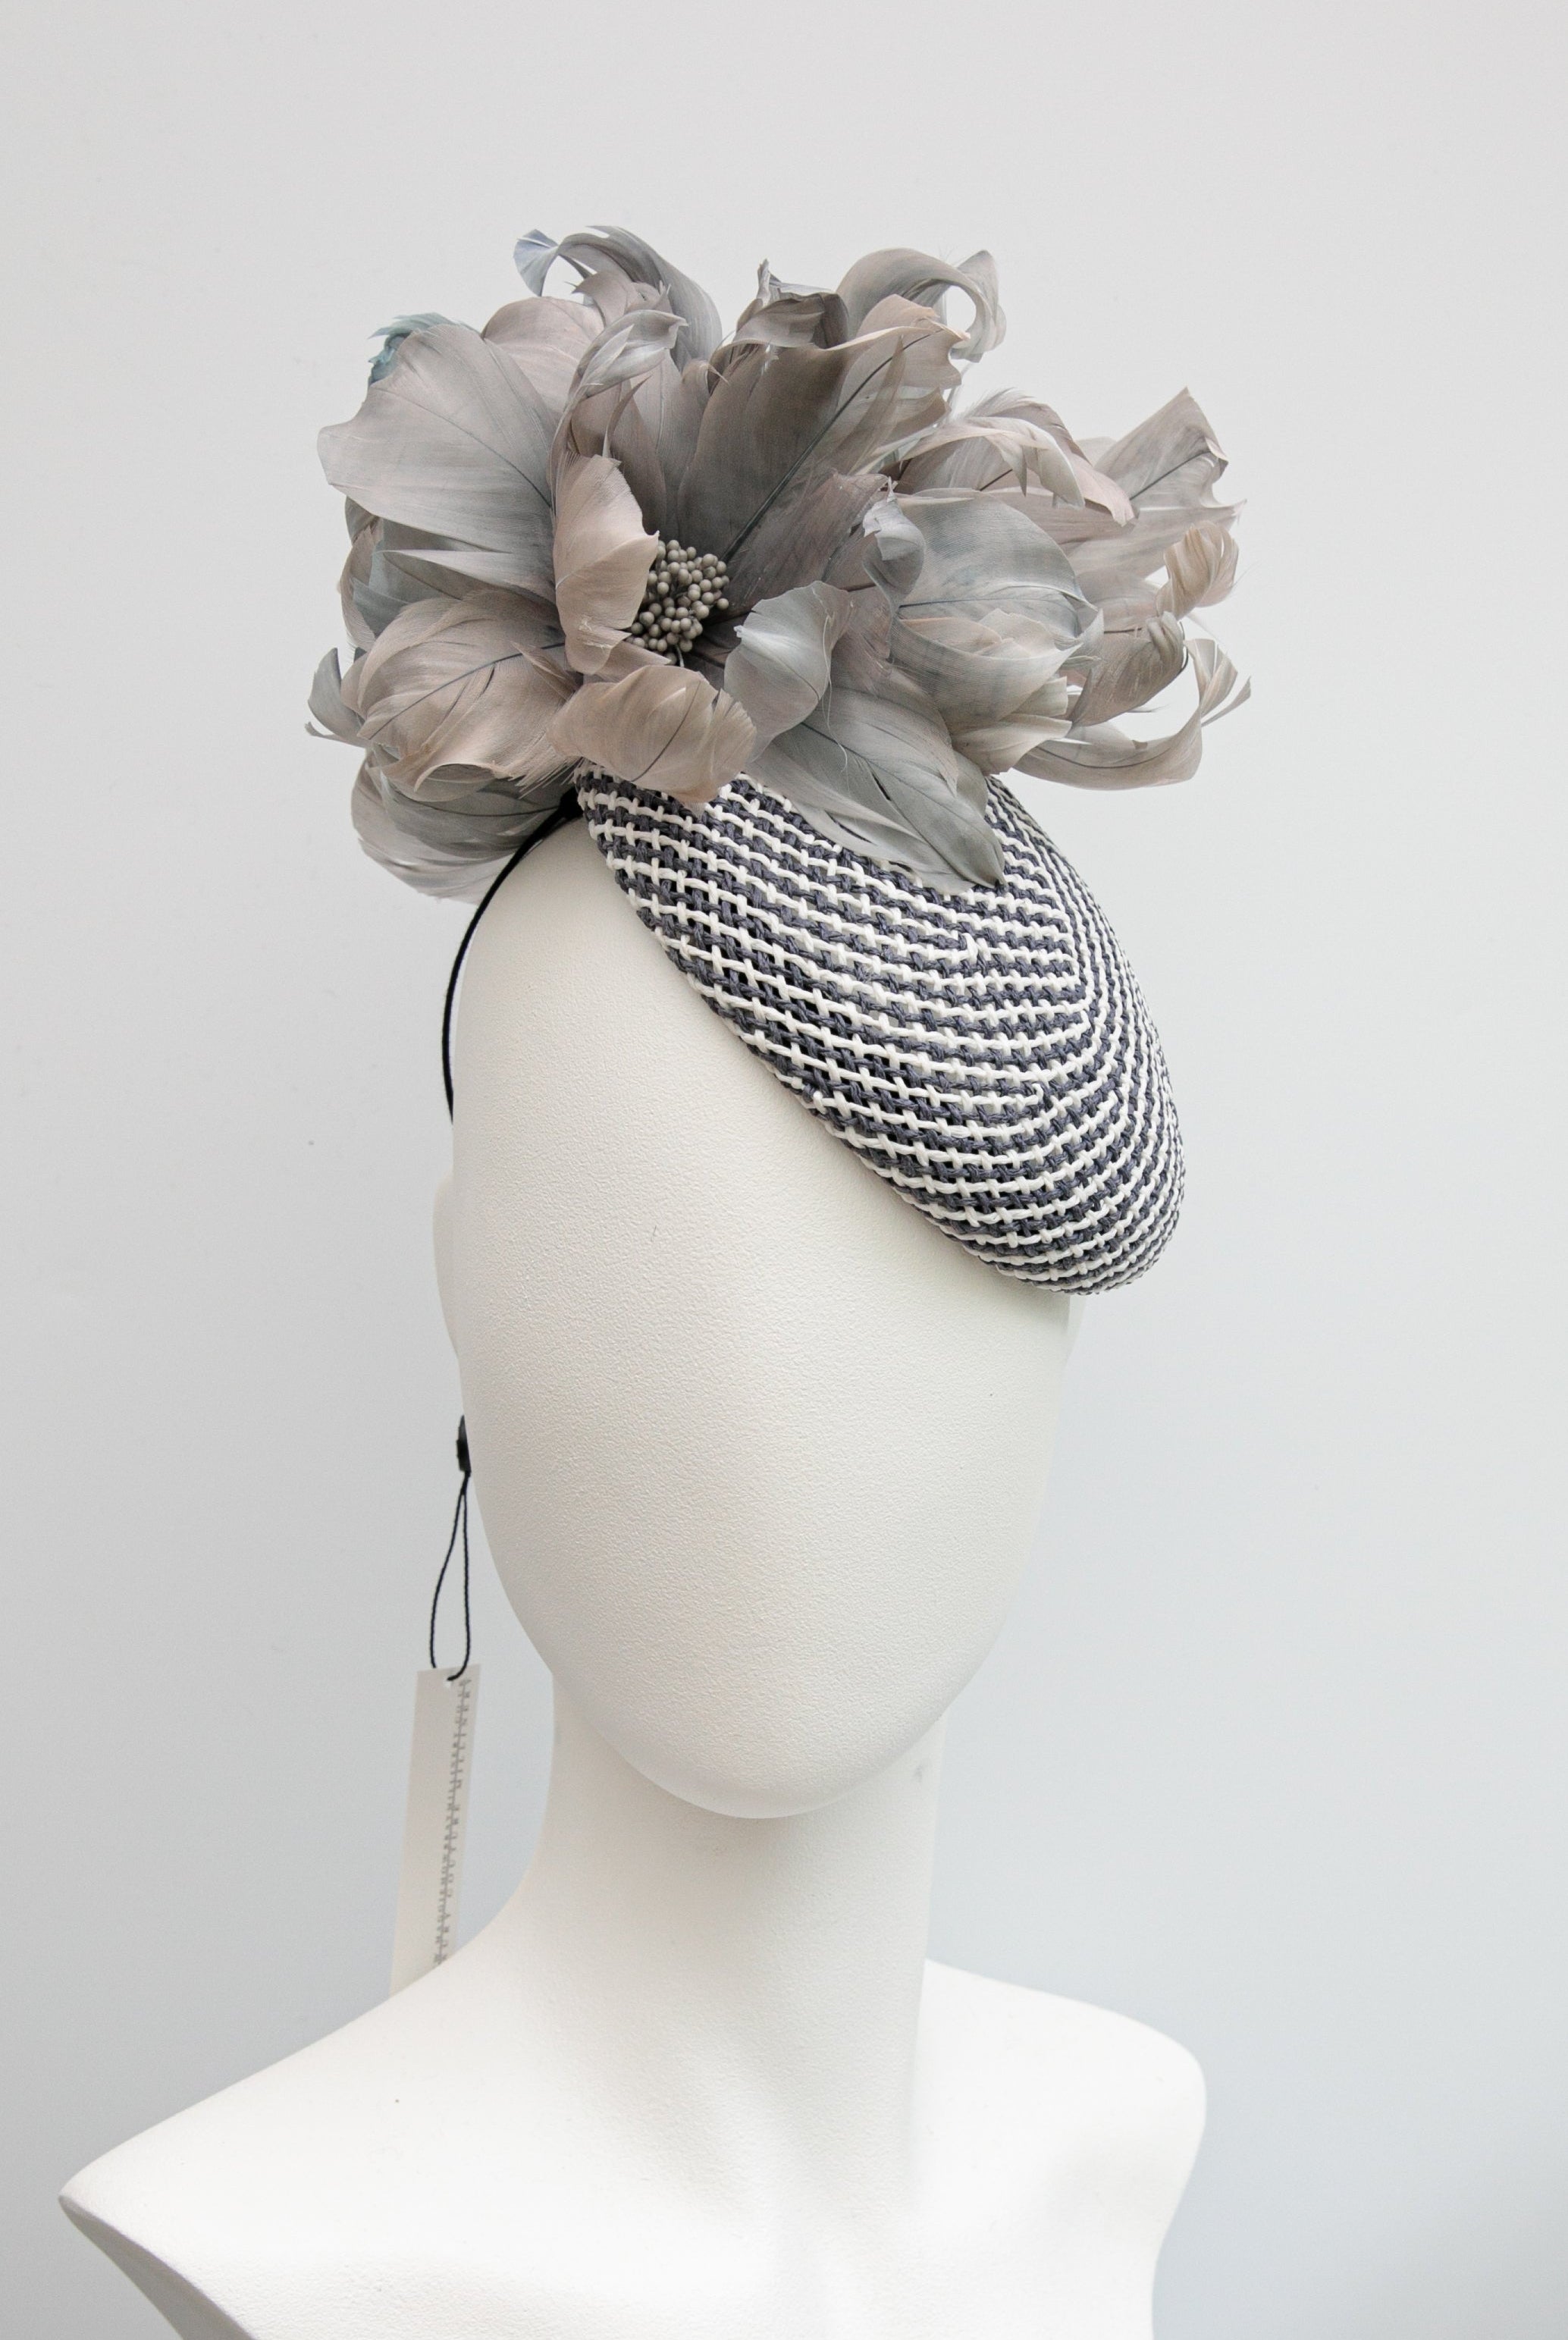 Sample - SSS02 - Maggie Mowbray Millinery